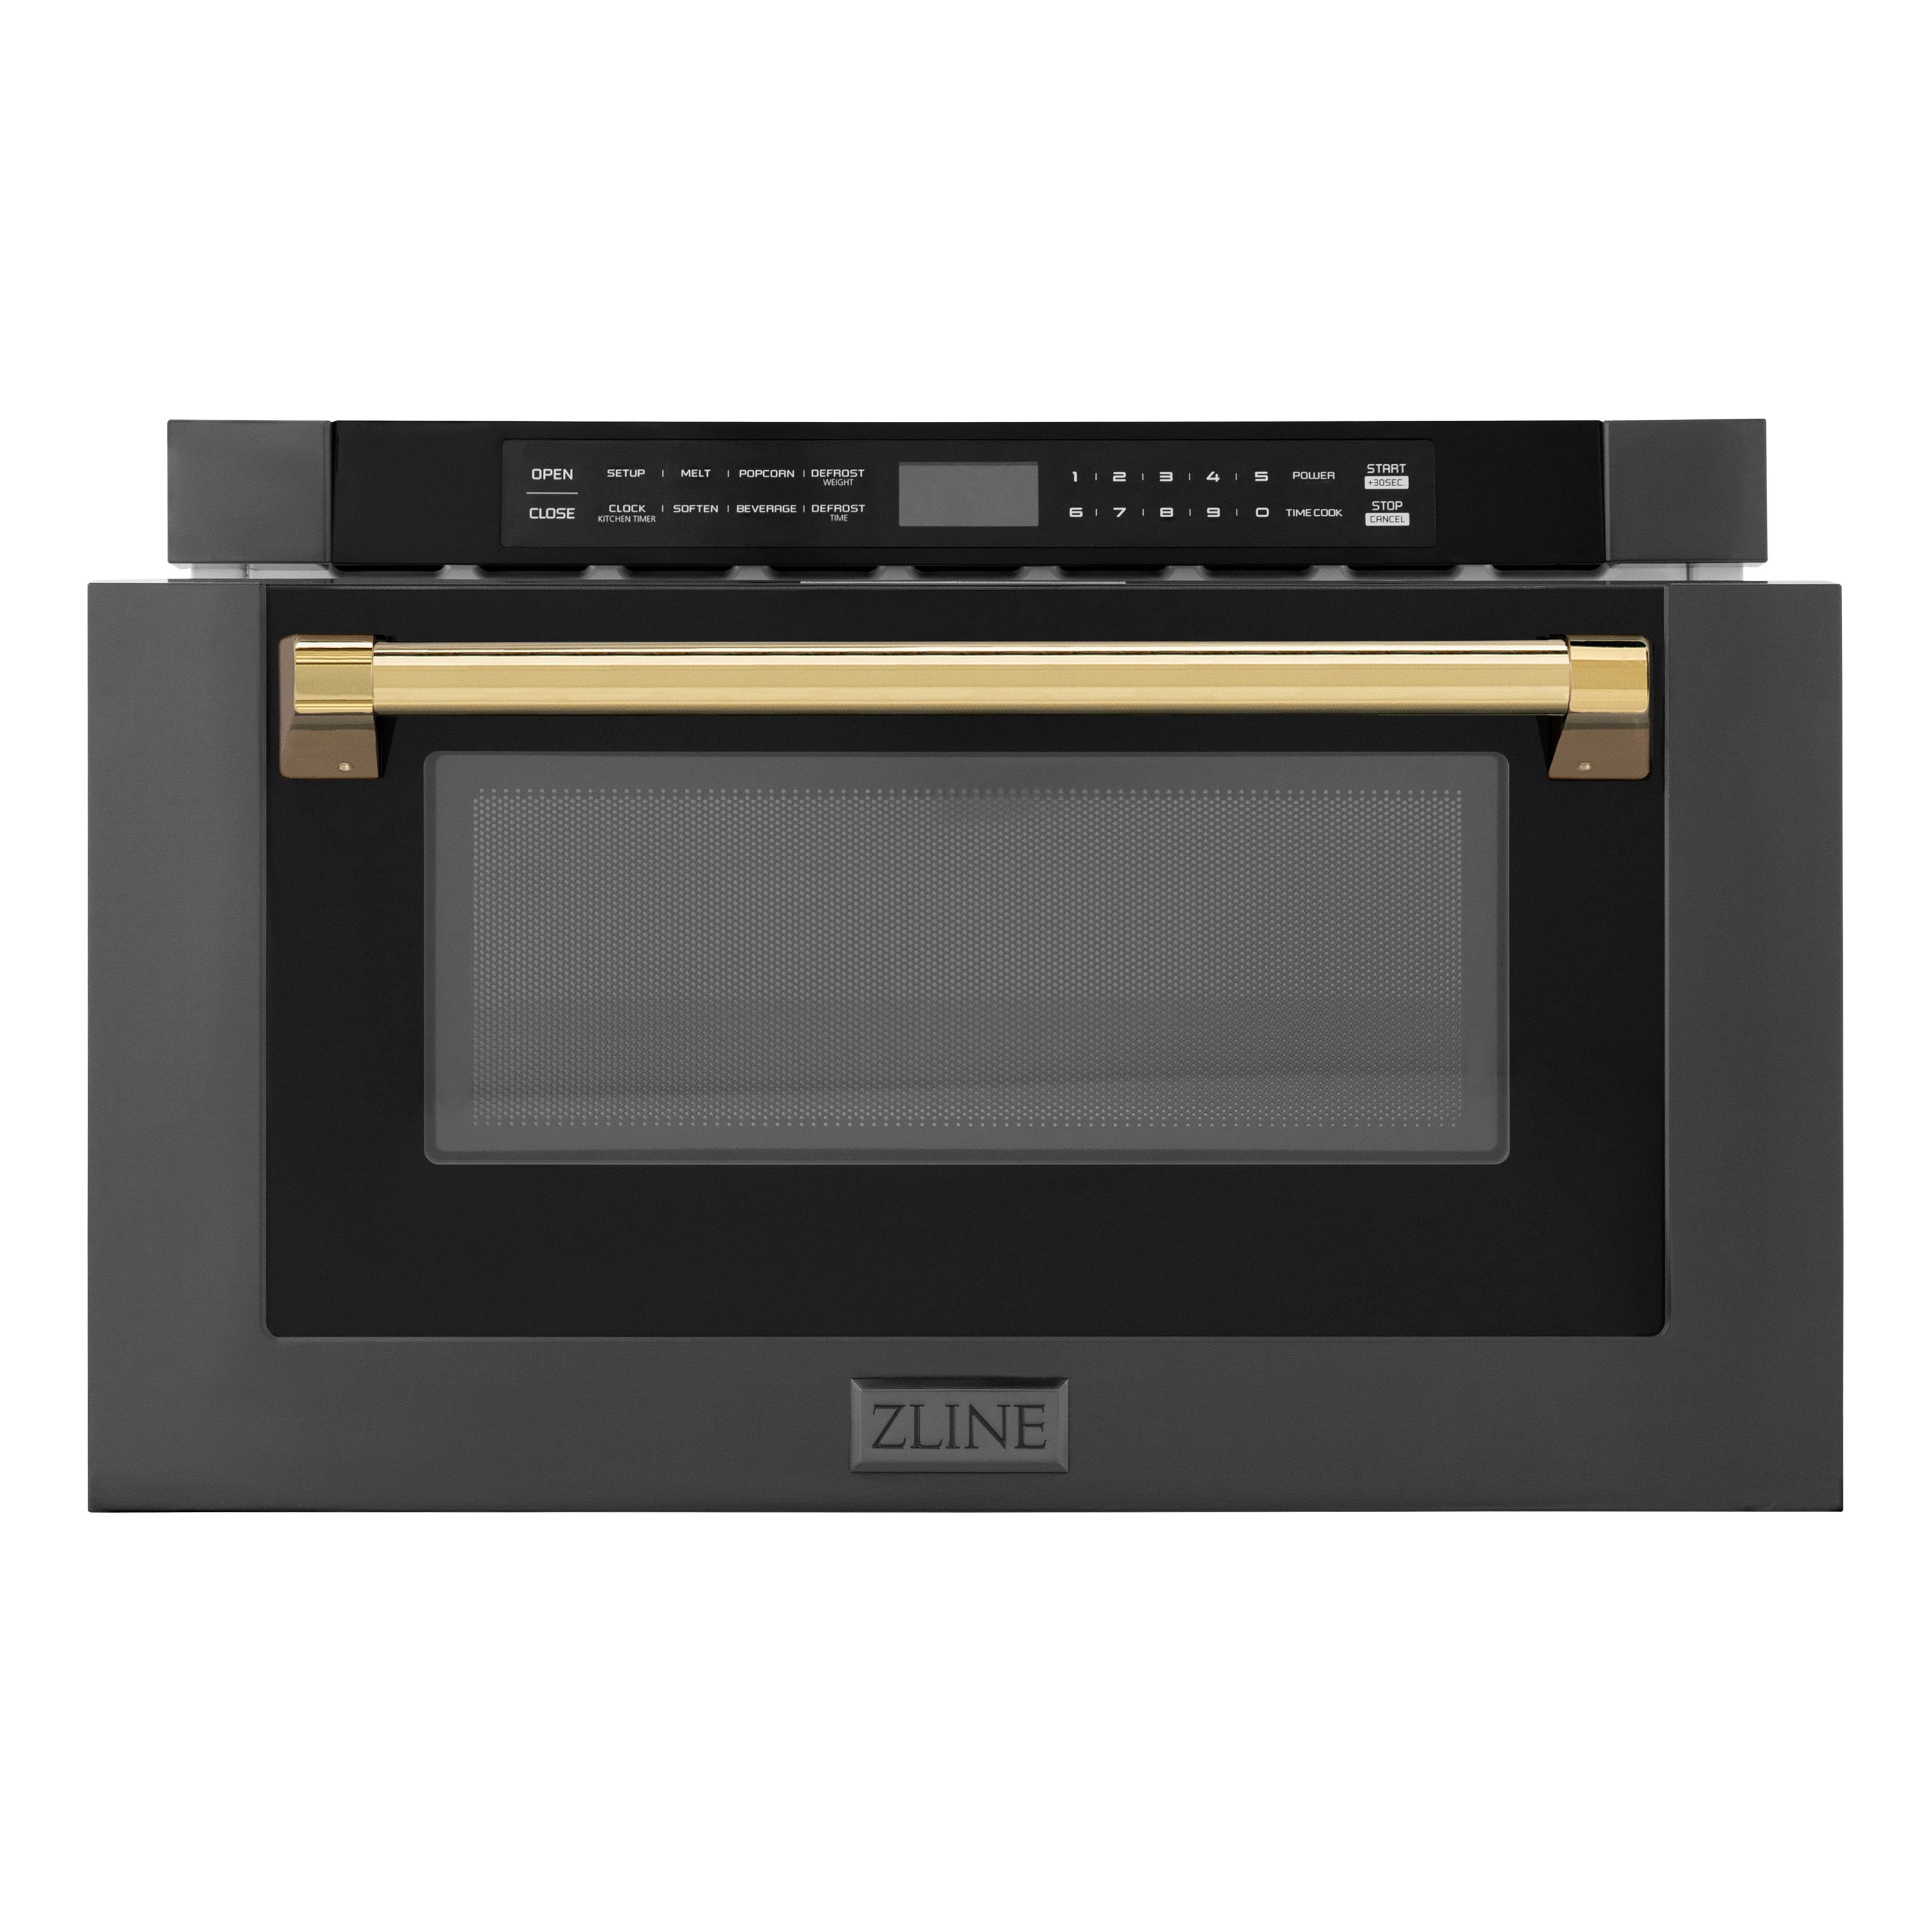 ZLINE Autograph Edition 24 in. 1.2 cu. ft. Built-in Microwave Drawer in Black Stainless Steel with Gold Accents (MWDZ-1-BS-H-G) Front View Drawer Open